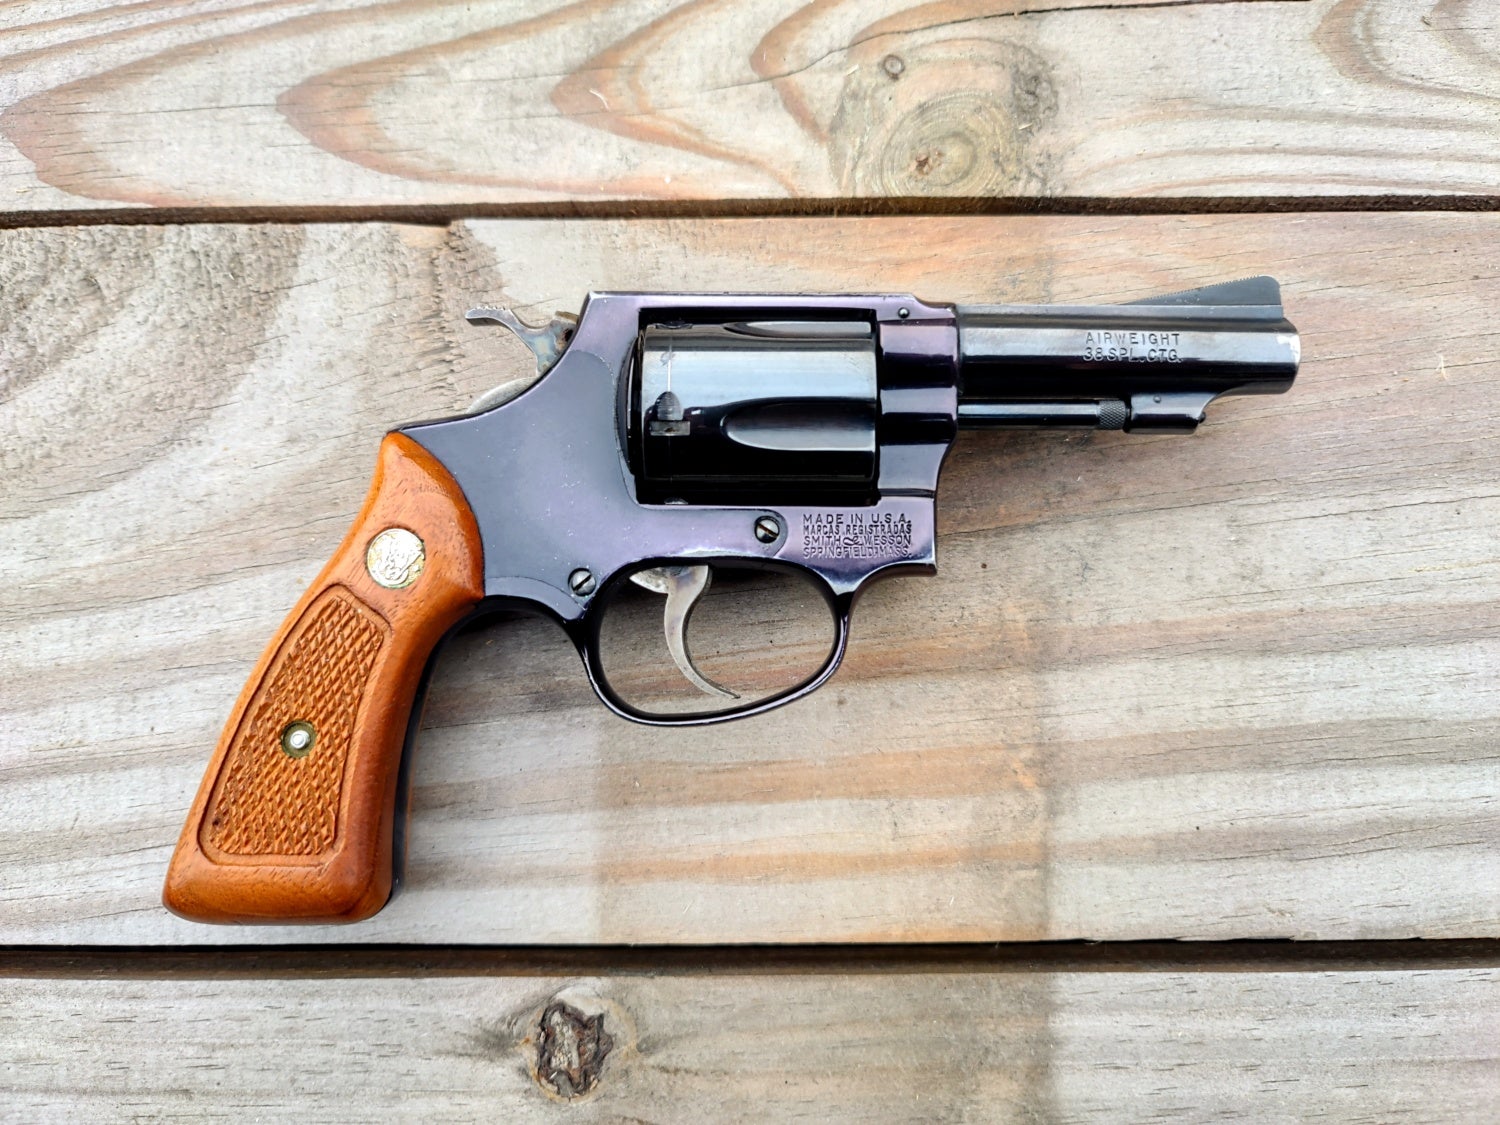 Wheelgun Wednesday: Smith & Wesson Model 37 Chief Special Airweight